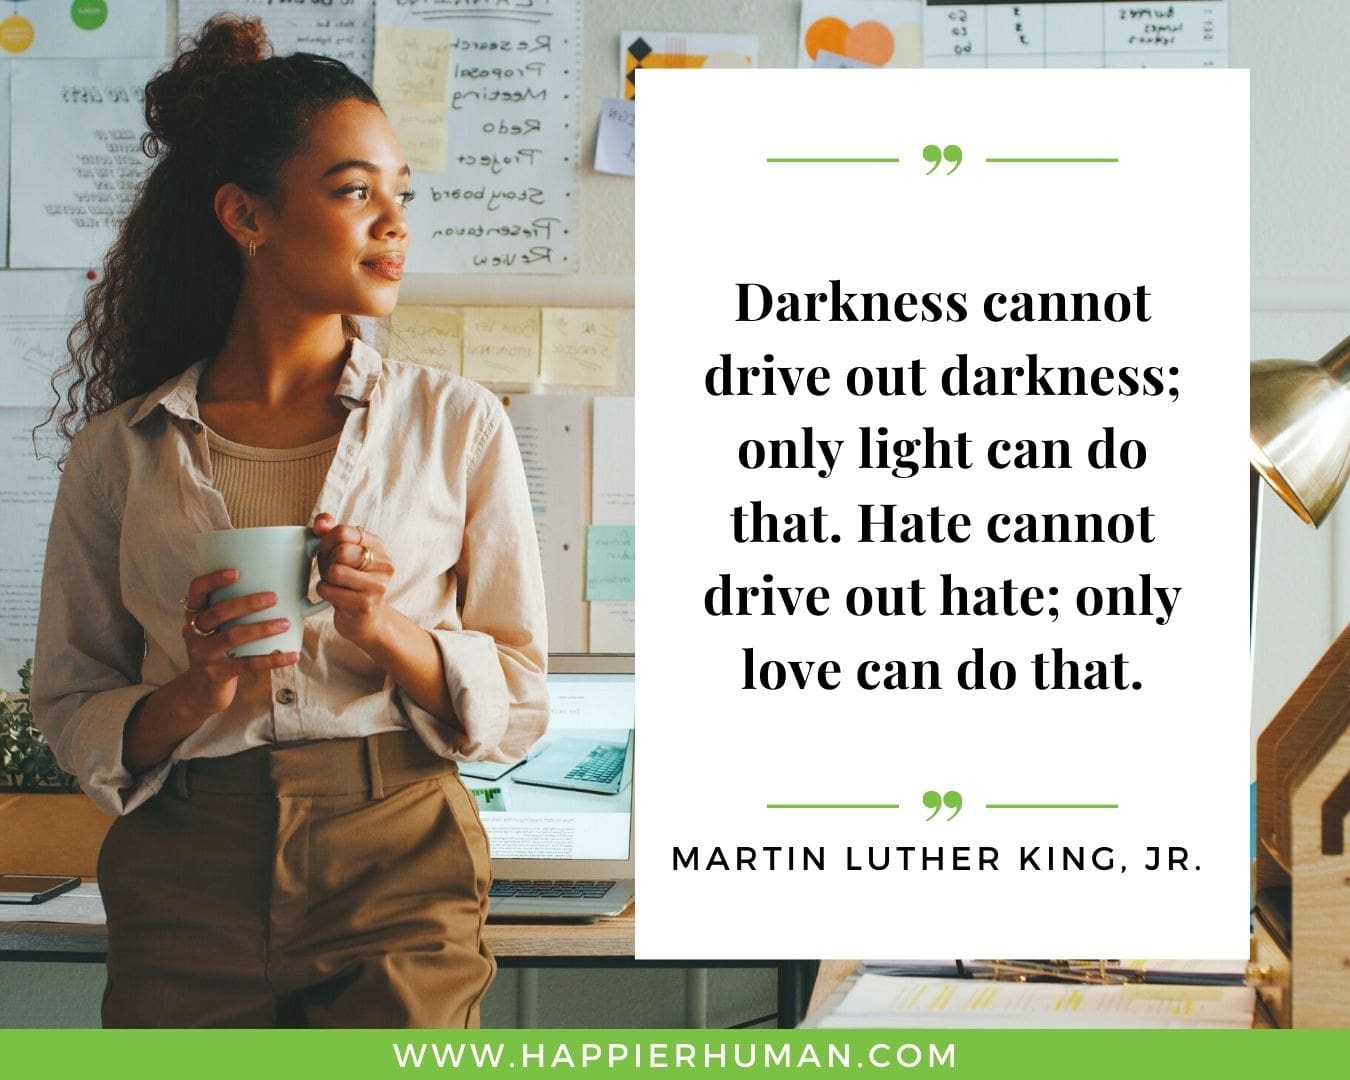 Haters Quotes - “Darkness cannot drive out darkness; only light can do that. Hate cannot drive out hate; only love can do that.” - Martin Luther King, Jr.